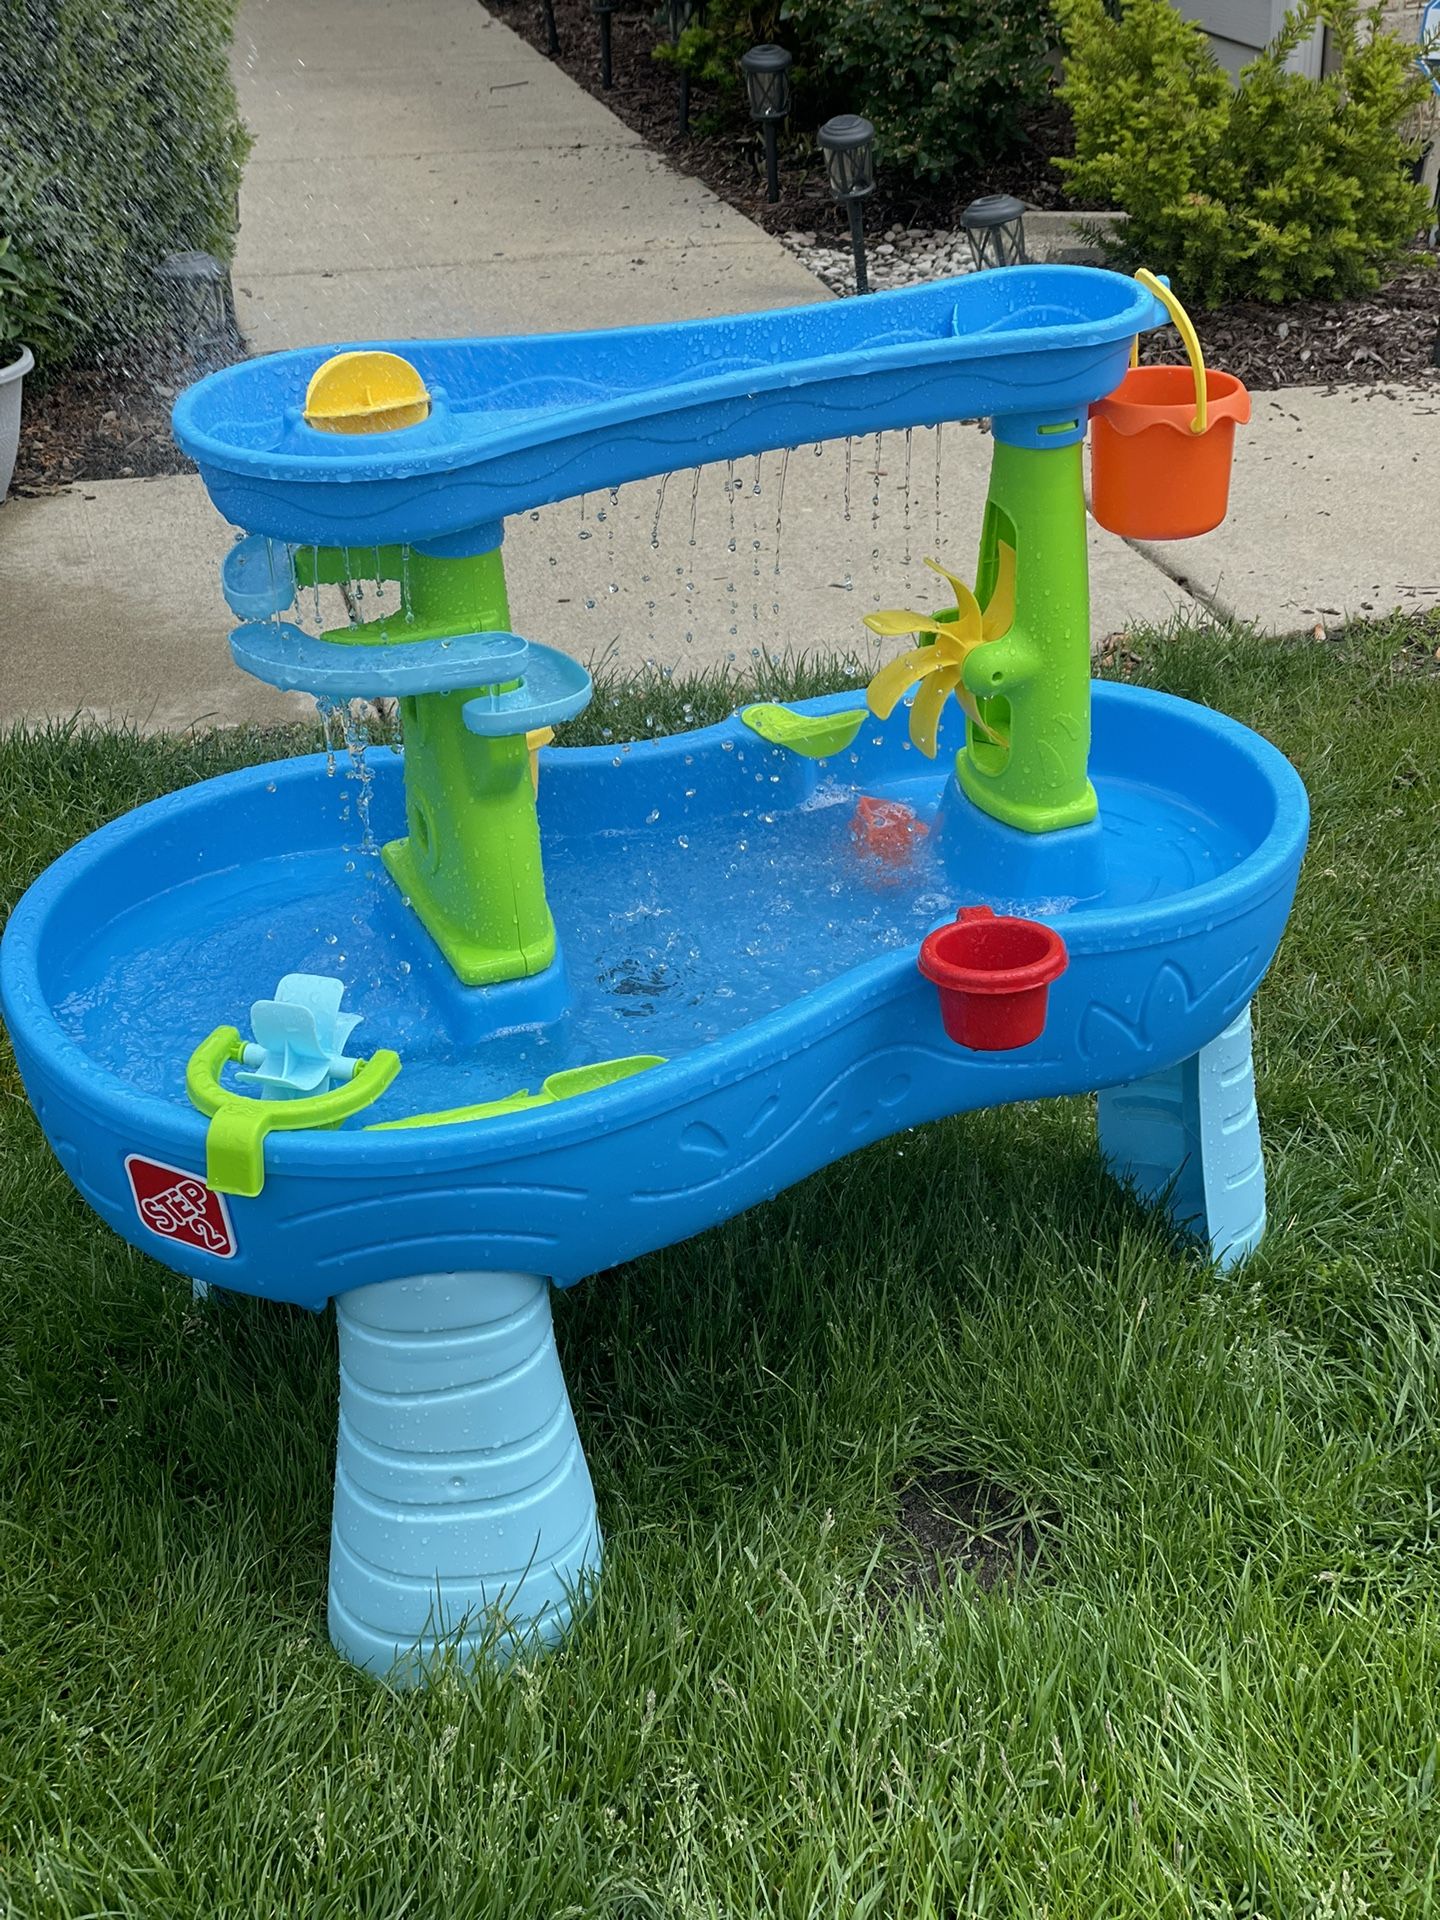 Step2 Rain Showers Splash Pond Toddler Water Table, Outdoor Kids Water Sensory Table, Ages 1.5+ Years Old, 13 Piece Water Toy Accessories, Blue & Gree